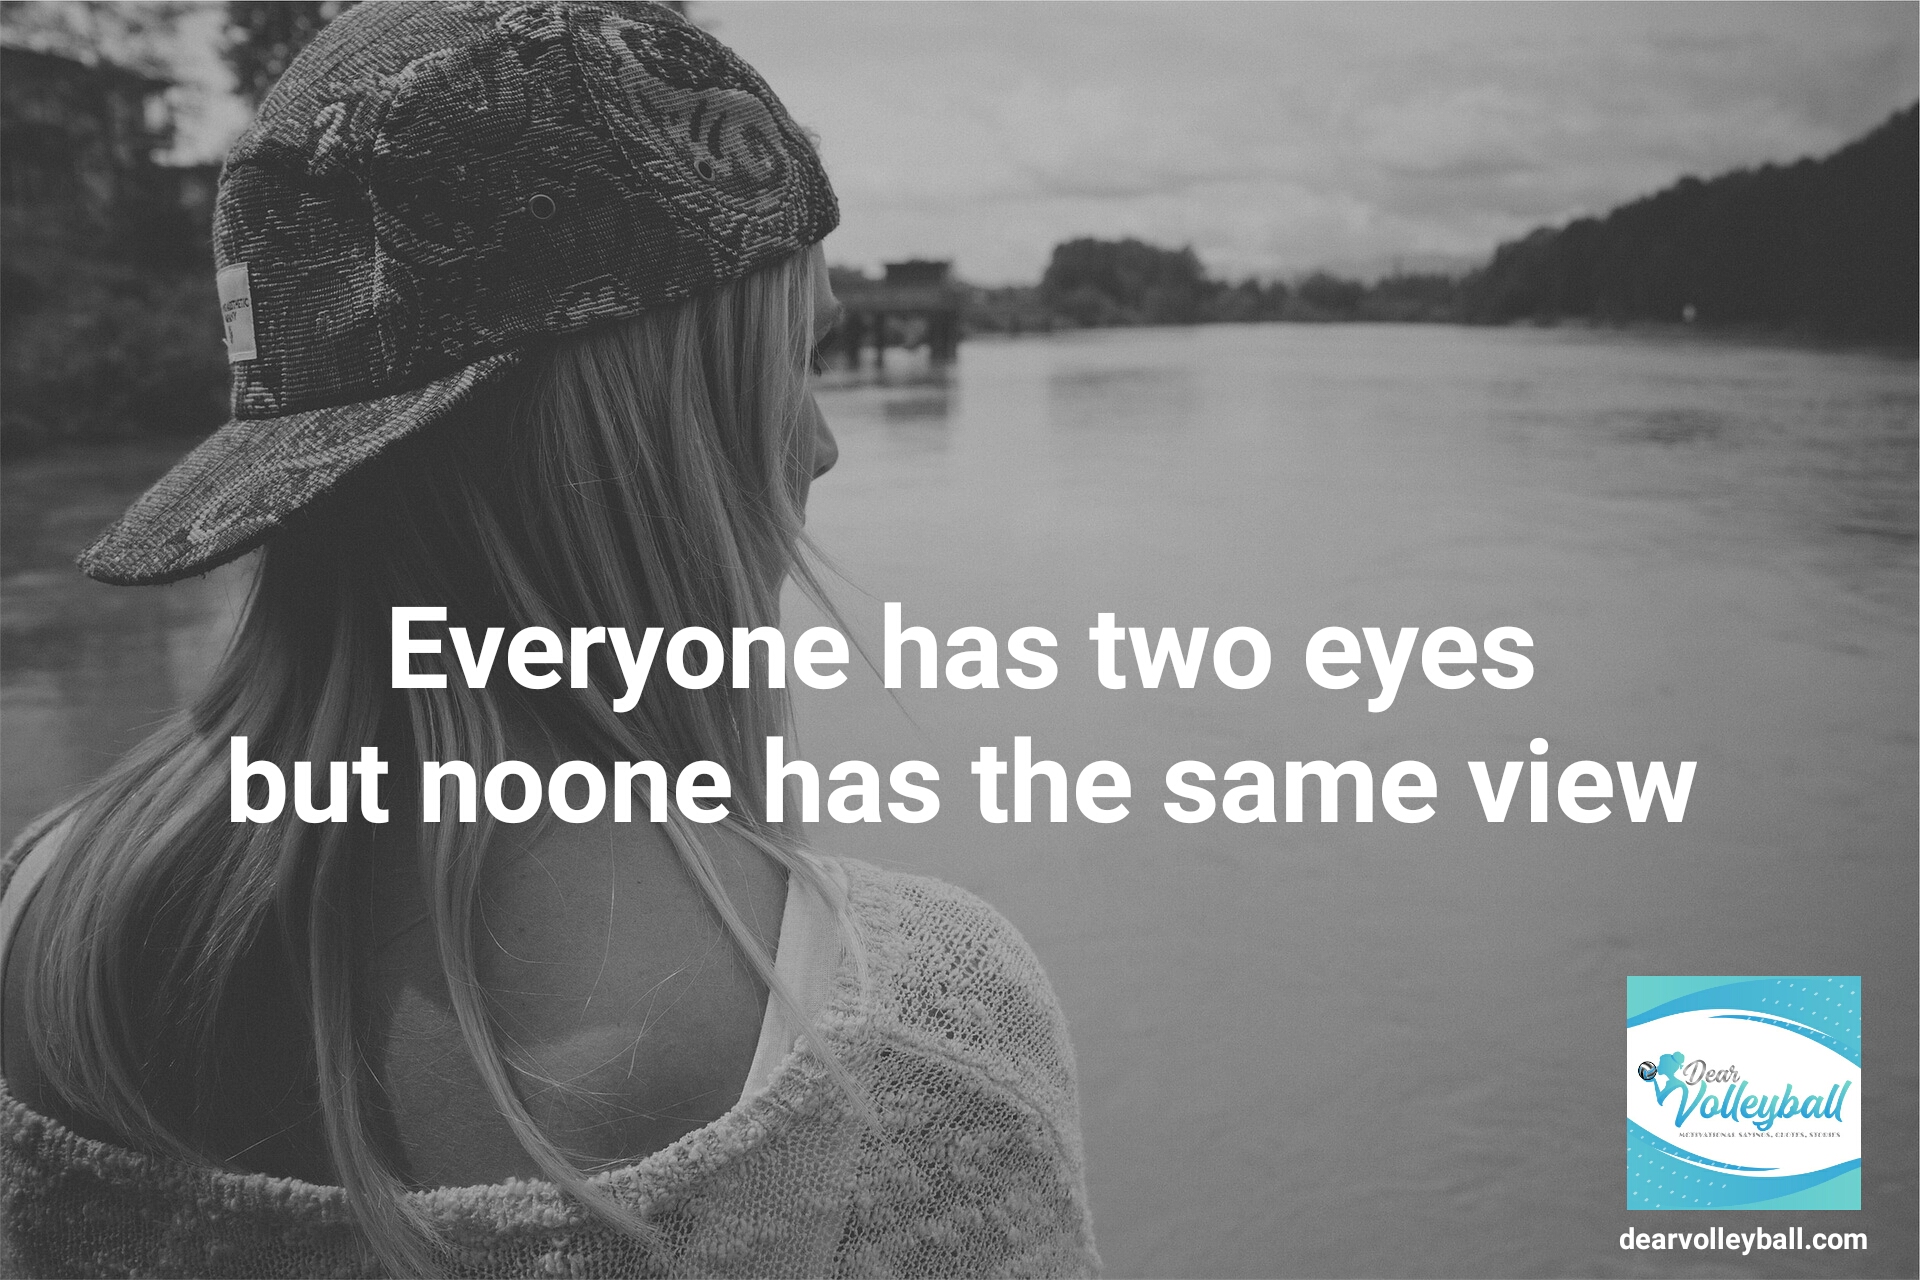 Everyone has two eyes but noone has the same view. Inspirational volleyball quotes and sayings on Dear Volleyball.com